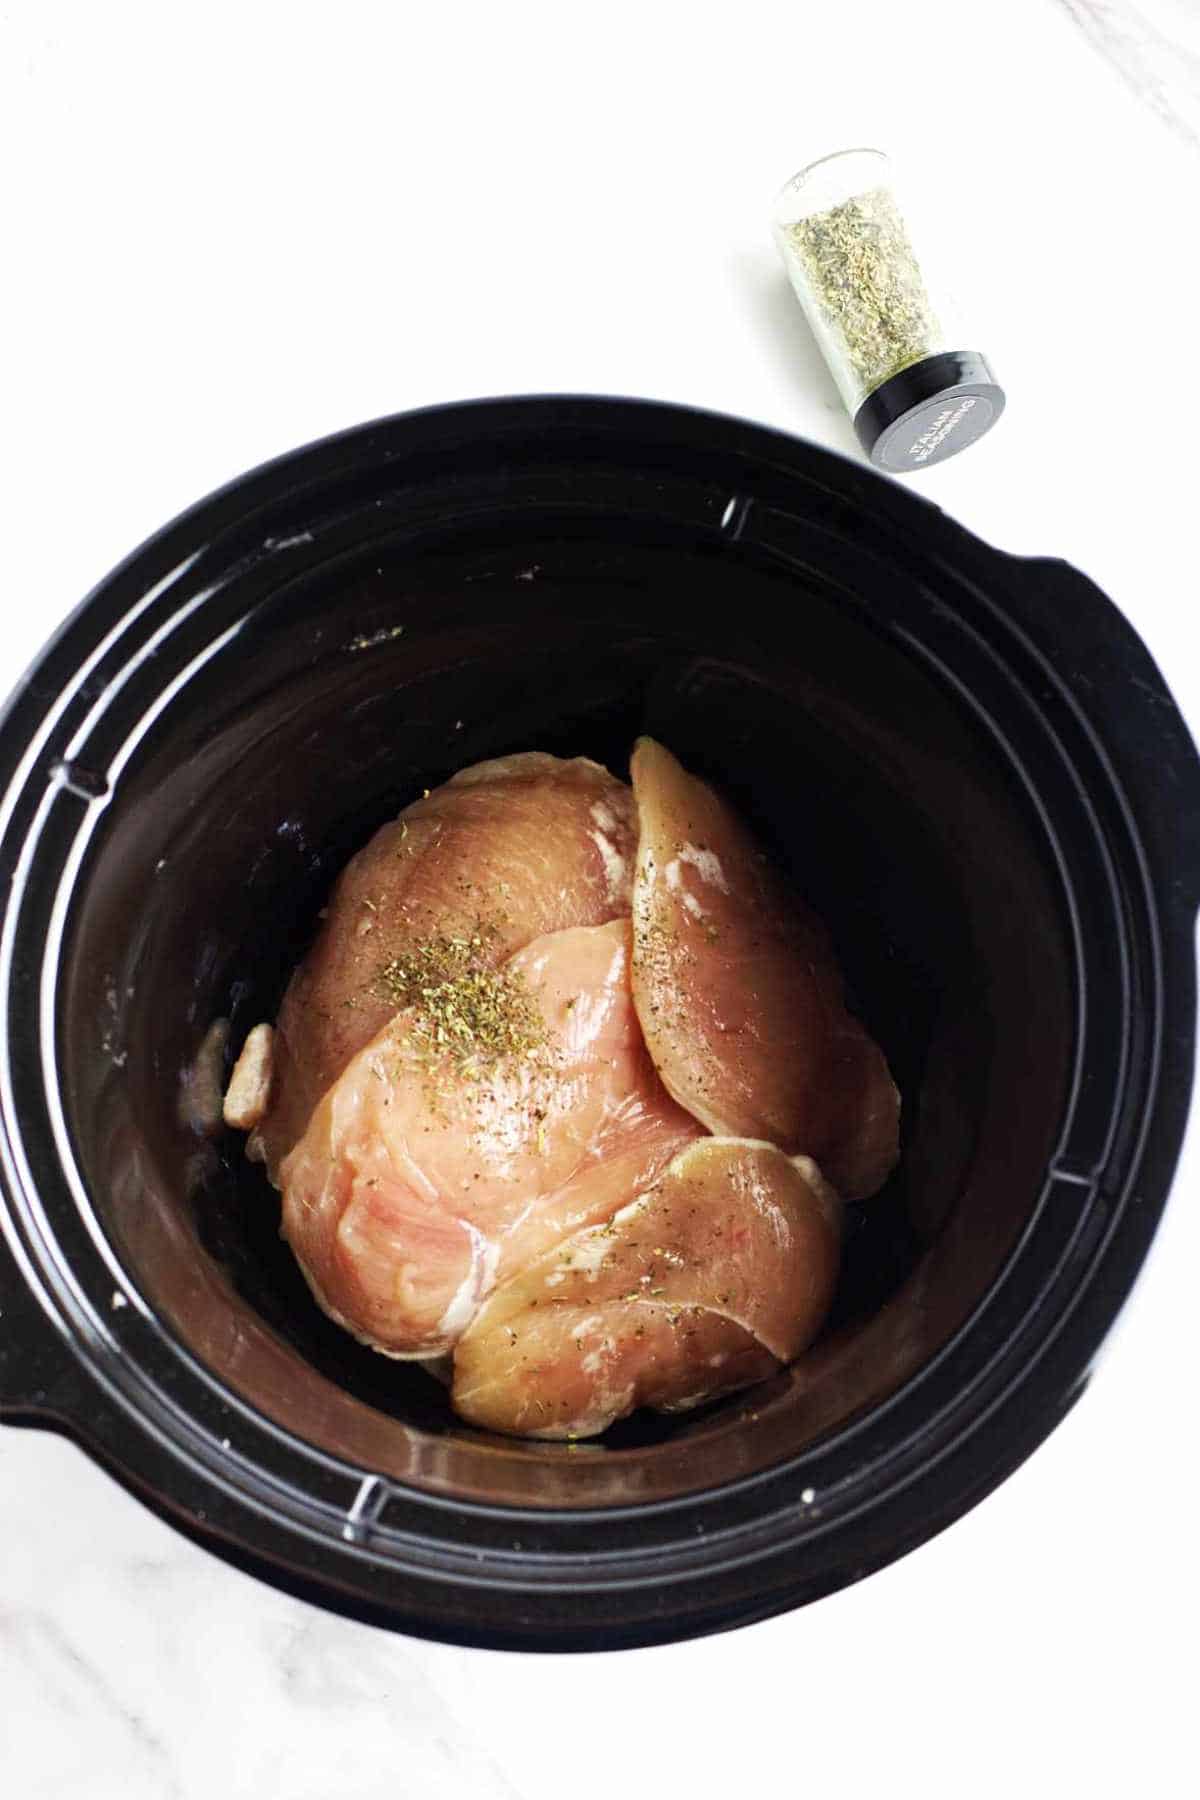 thigh or breast meat in a crockpot.